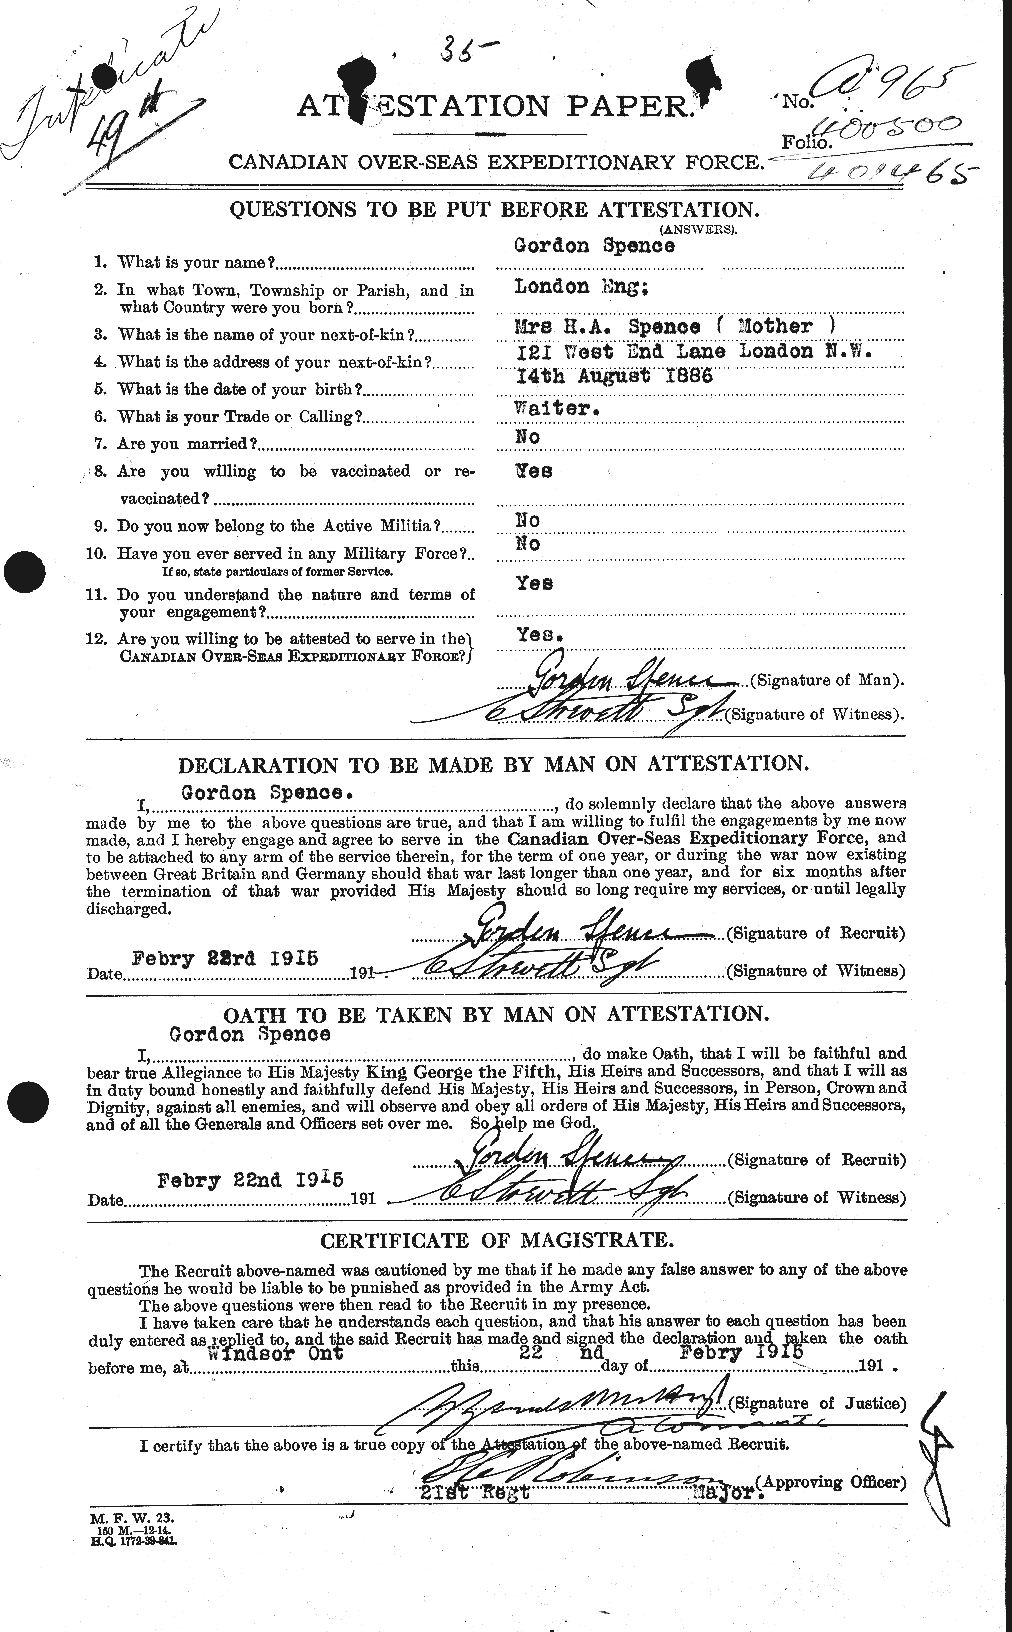 Personnel Records of the First World War - CEF 621318a